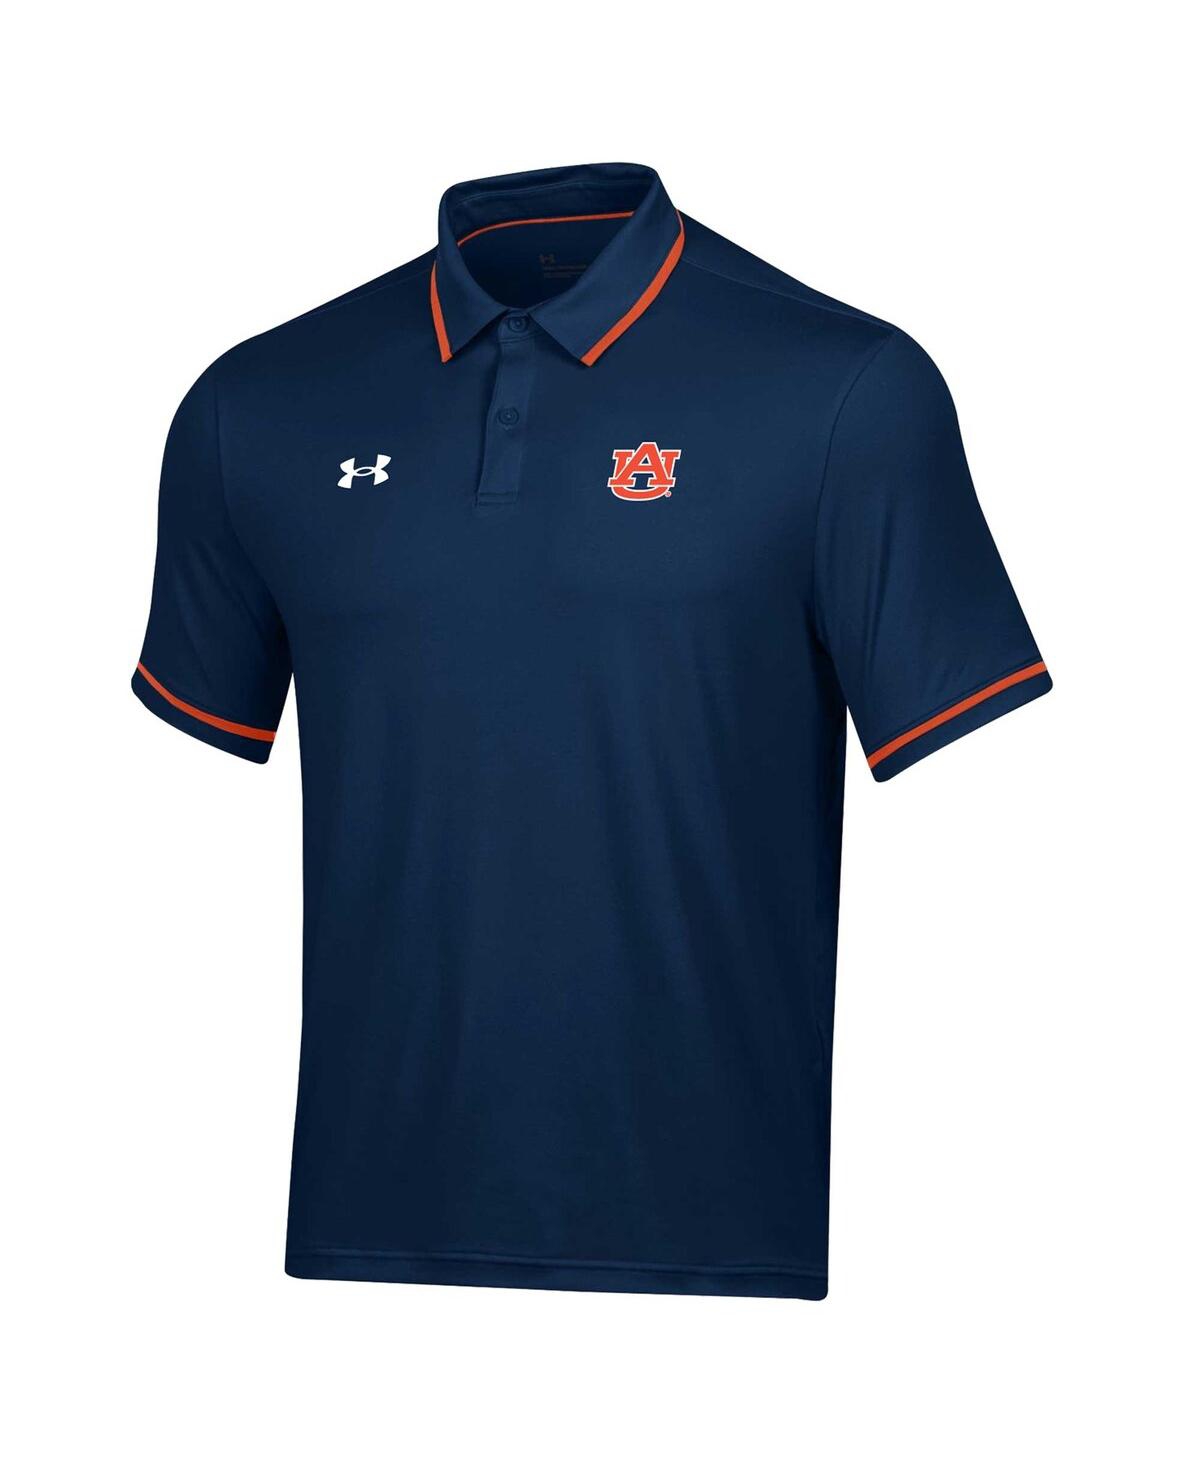 Shop Under Armour Men's  Navy Auburn Tigers T2 Tipped Performance Polo Shirt